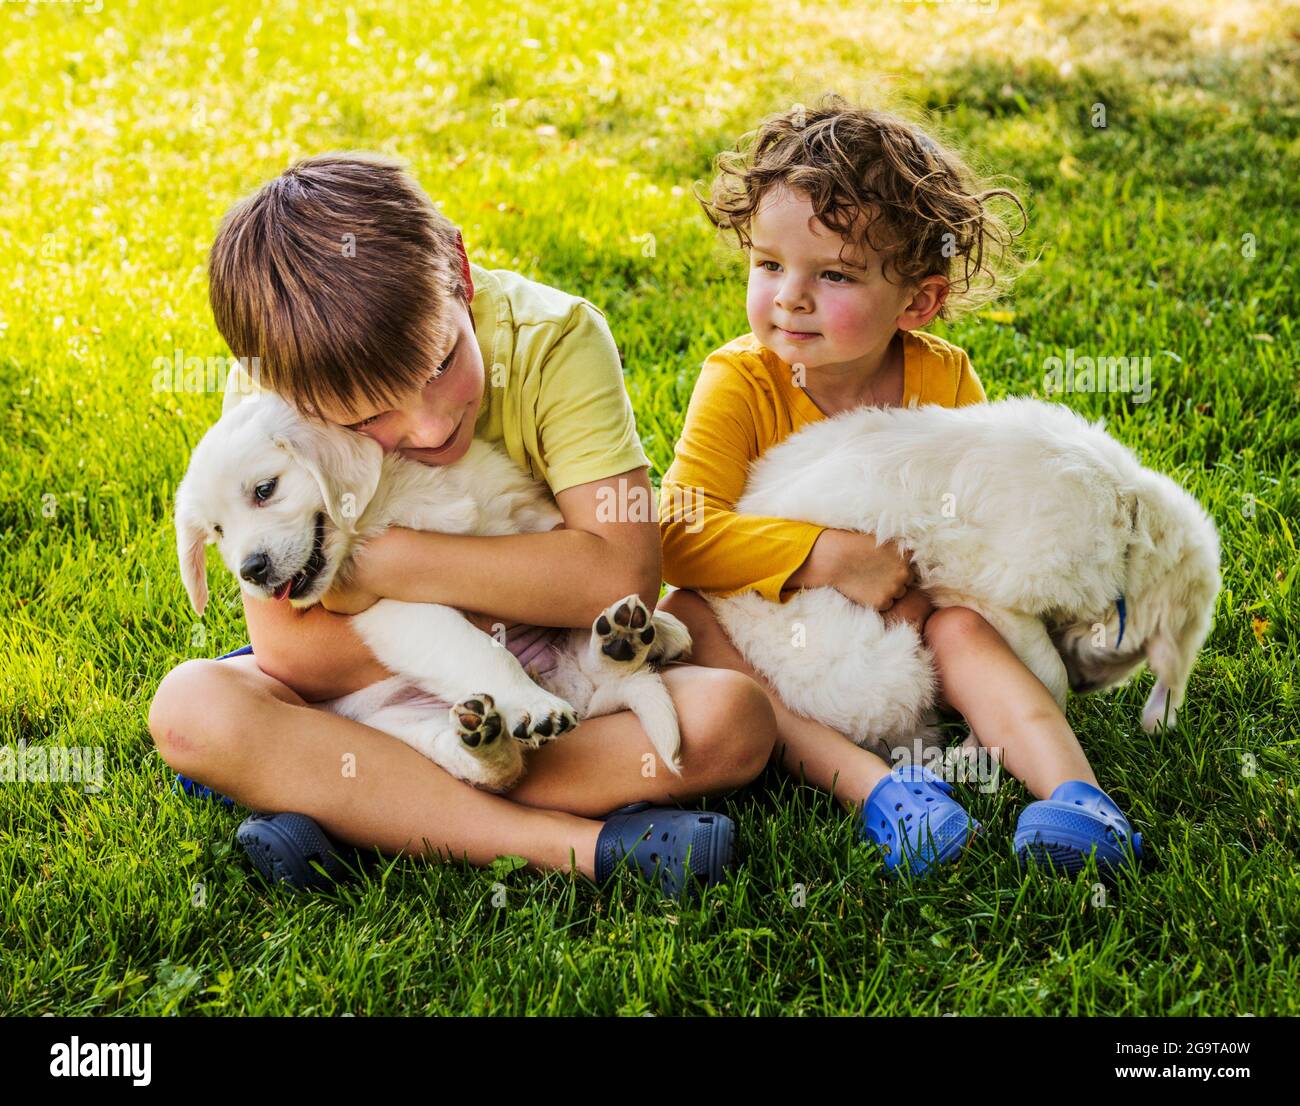 Two young children playing on grass with six week old Platinum, or Cream colored Golden Retriever puppies. Stock Photo